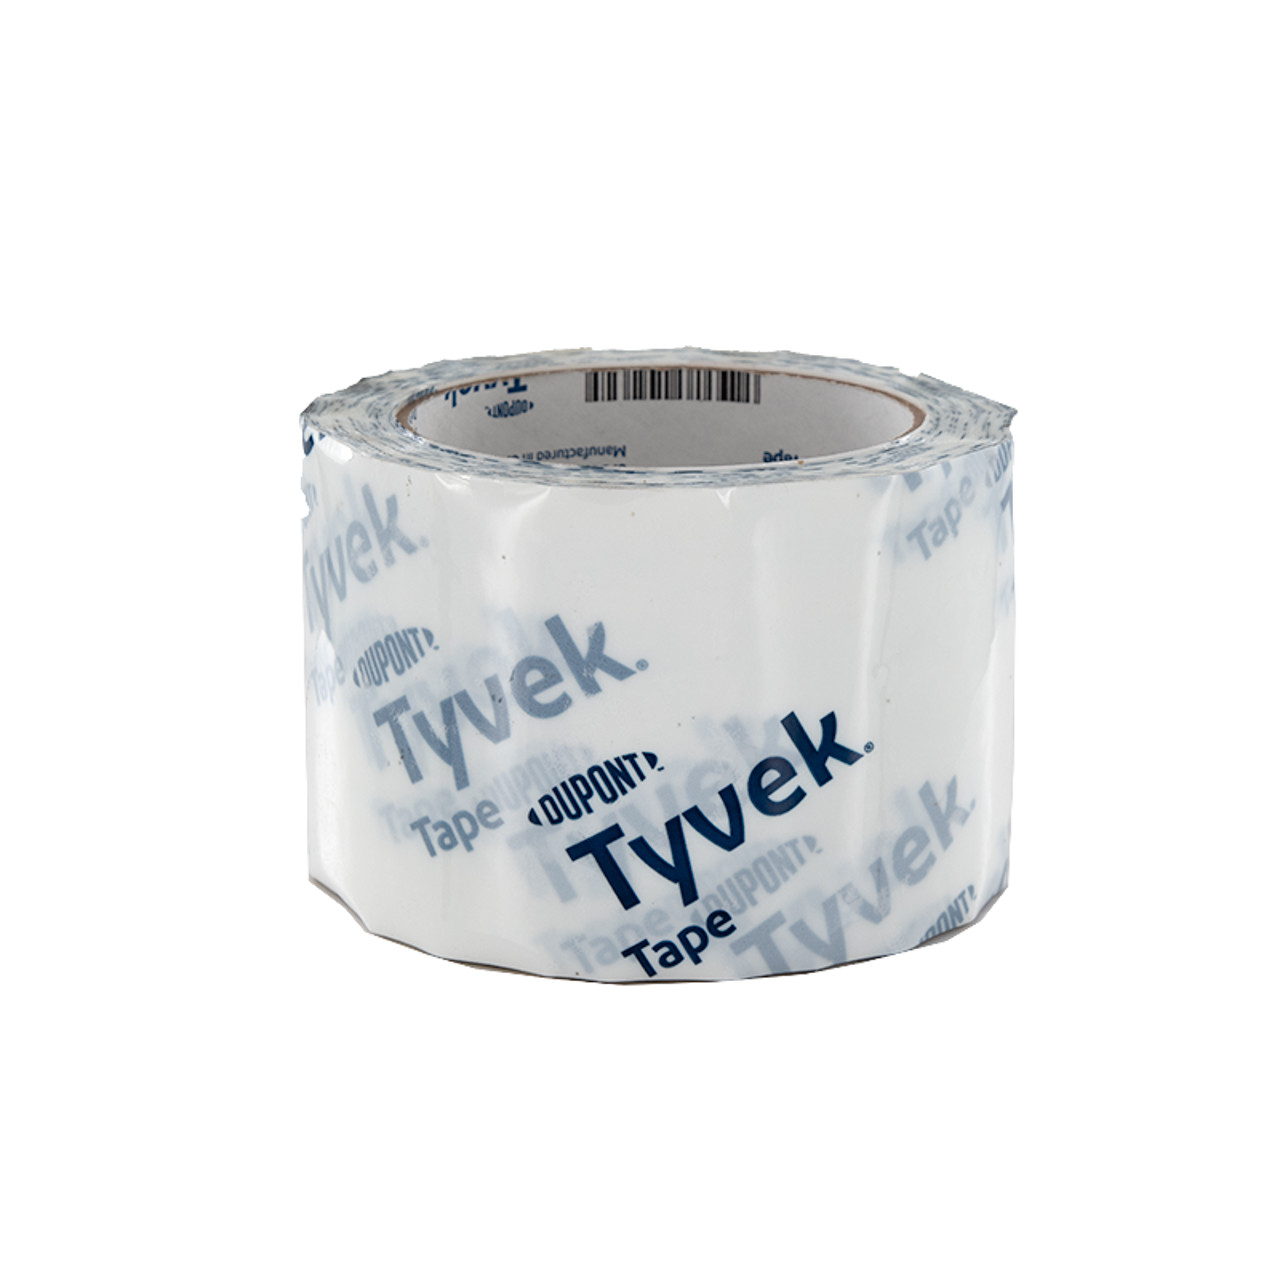 DuPont Tyvek Tape 3" Commercial Size Roll - Each